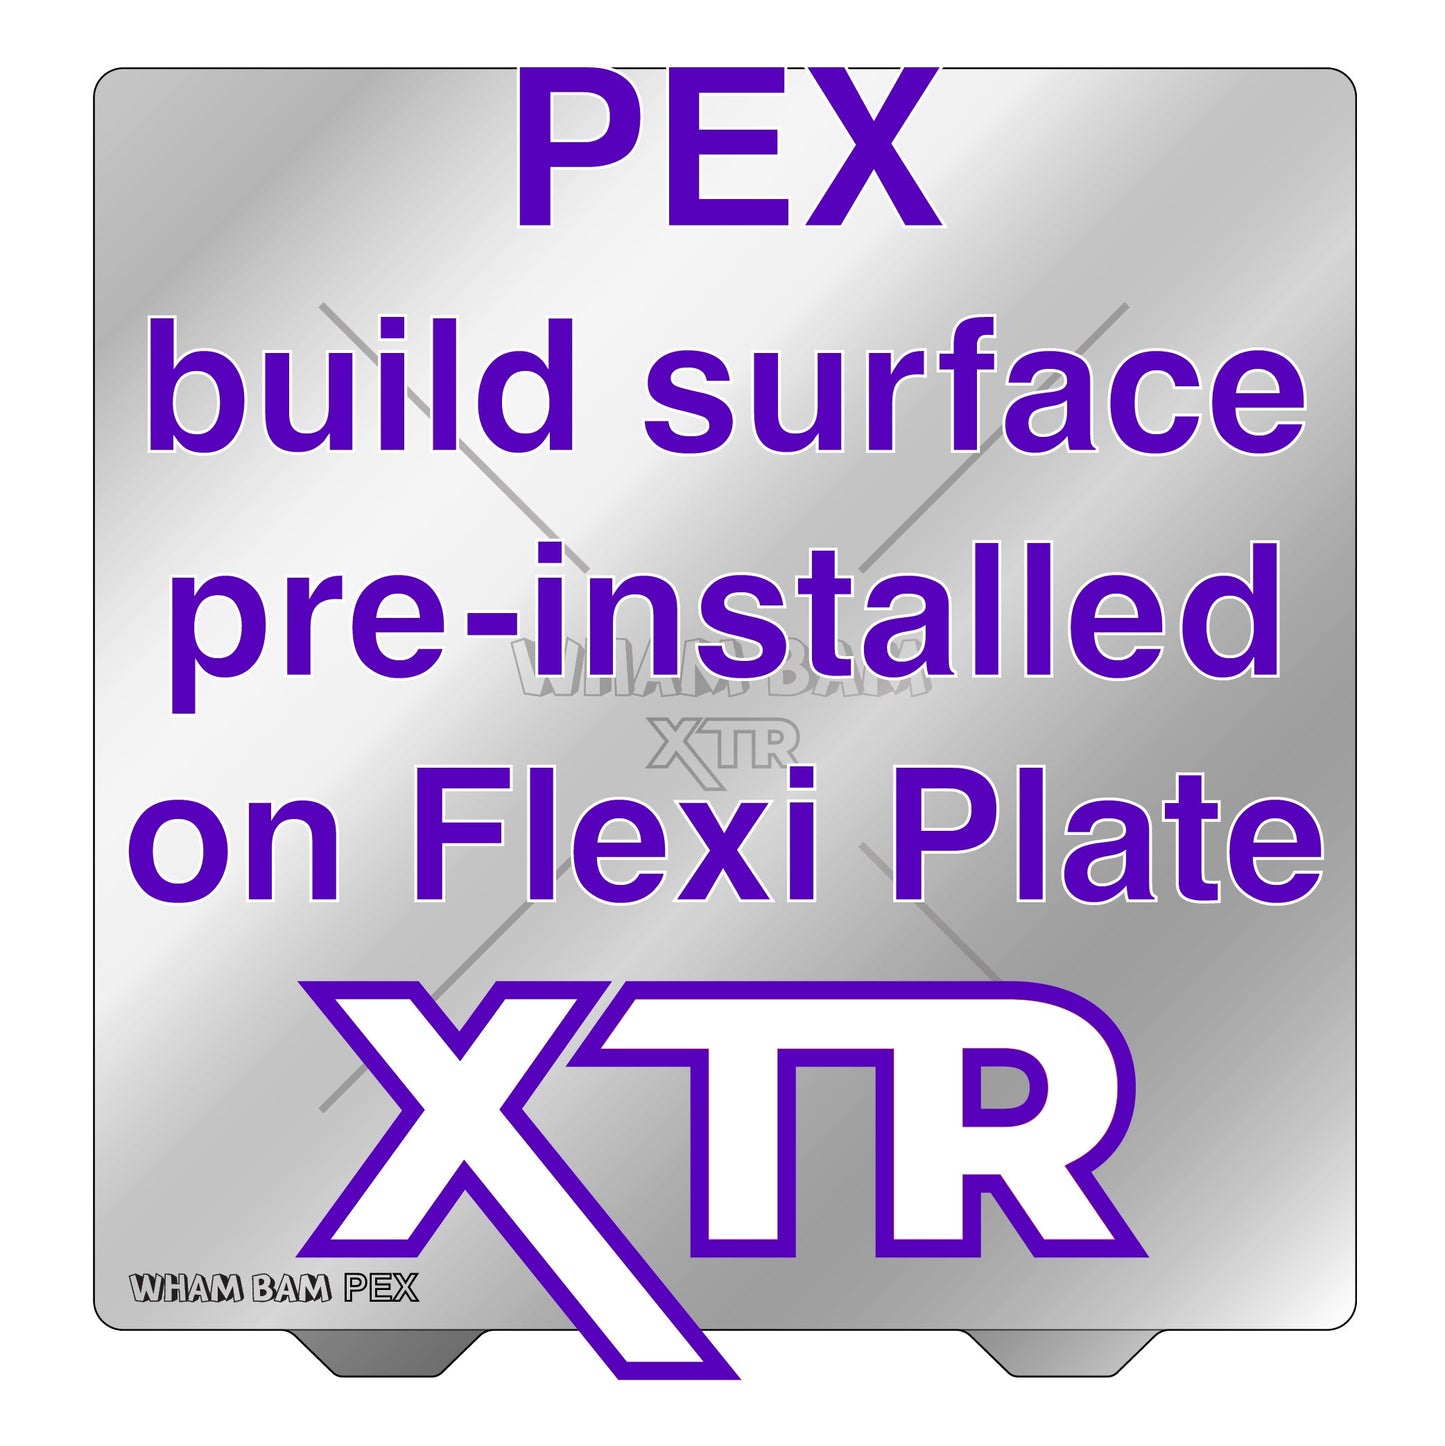 Flexi Plate with Pre-Installed PEX Build Surface XTR - 305 x 305 - Voron 2.4 300 and Voron Trident 300